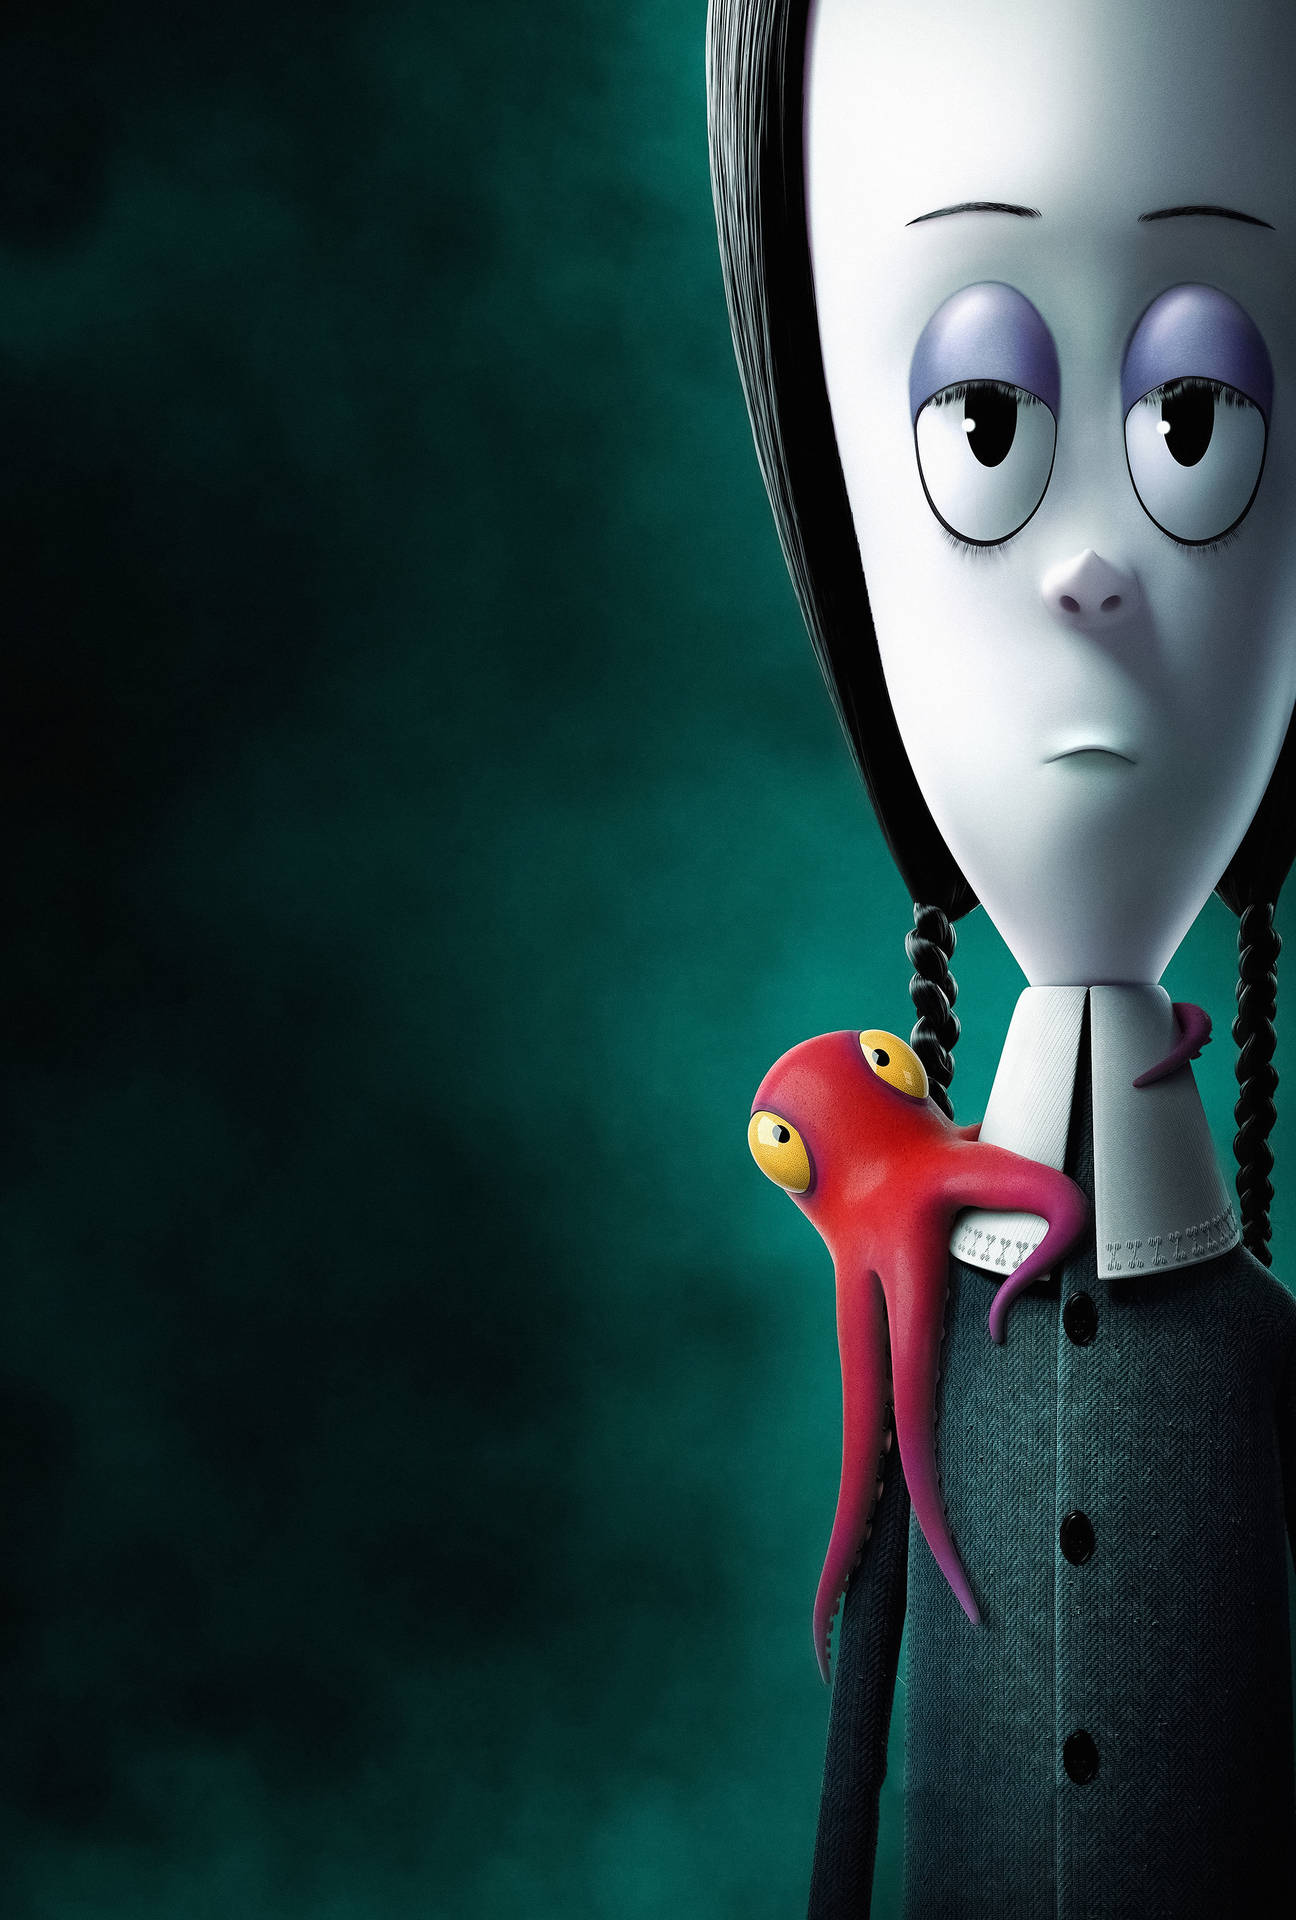 The Addams Family Animated - An Eerie Yet Charming Portrait Of Wednesday Addams Background